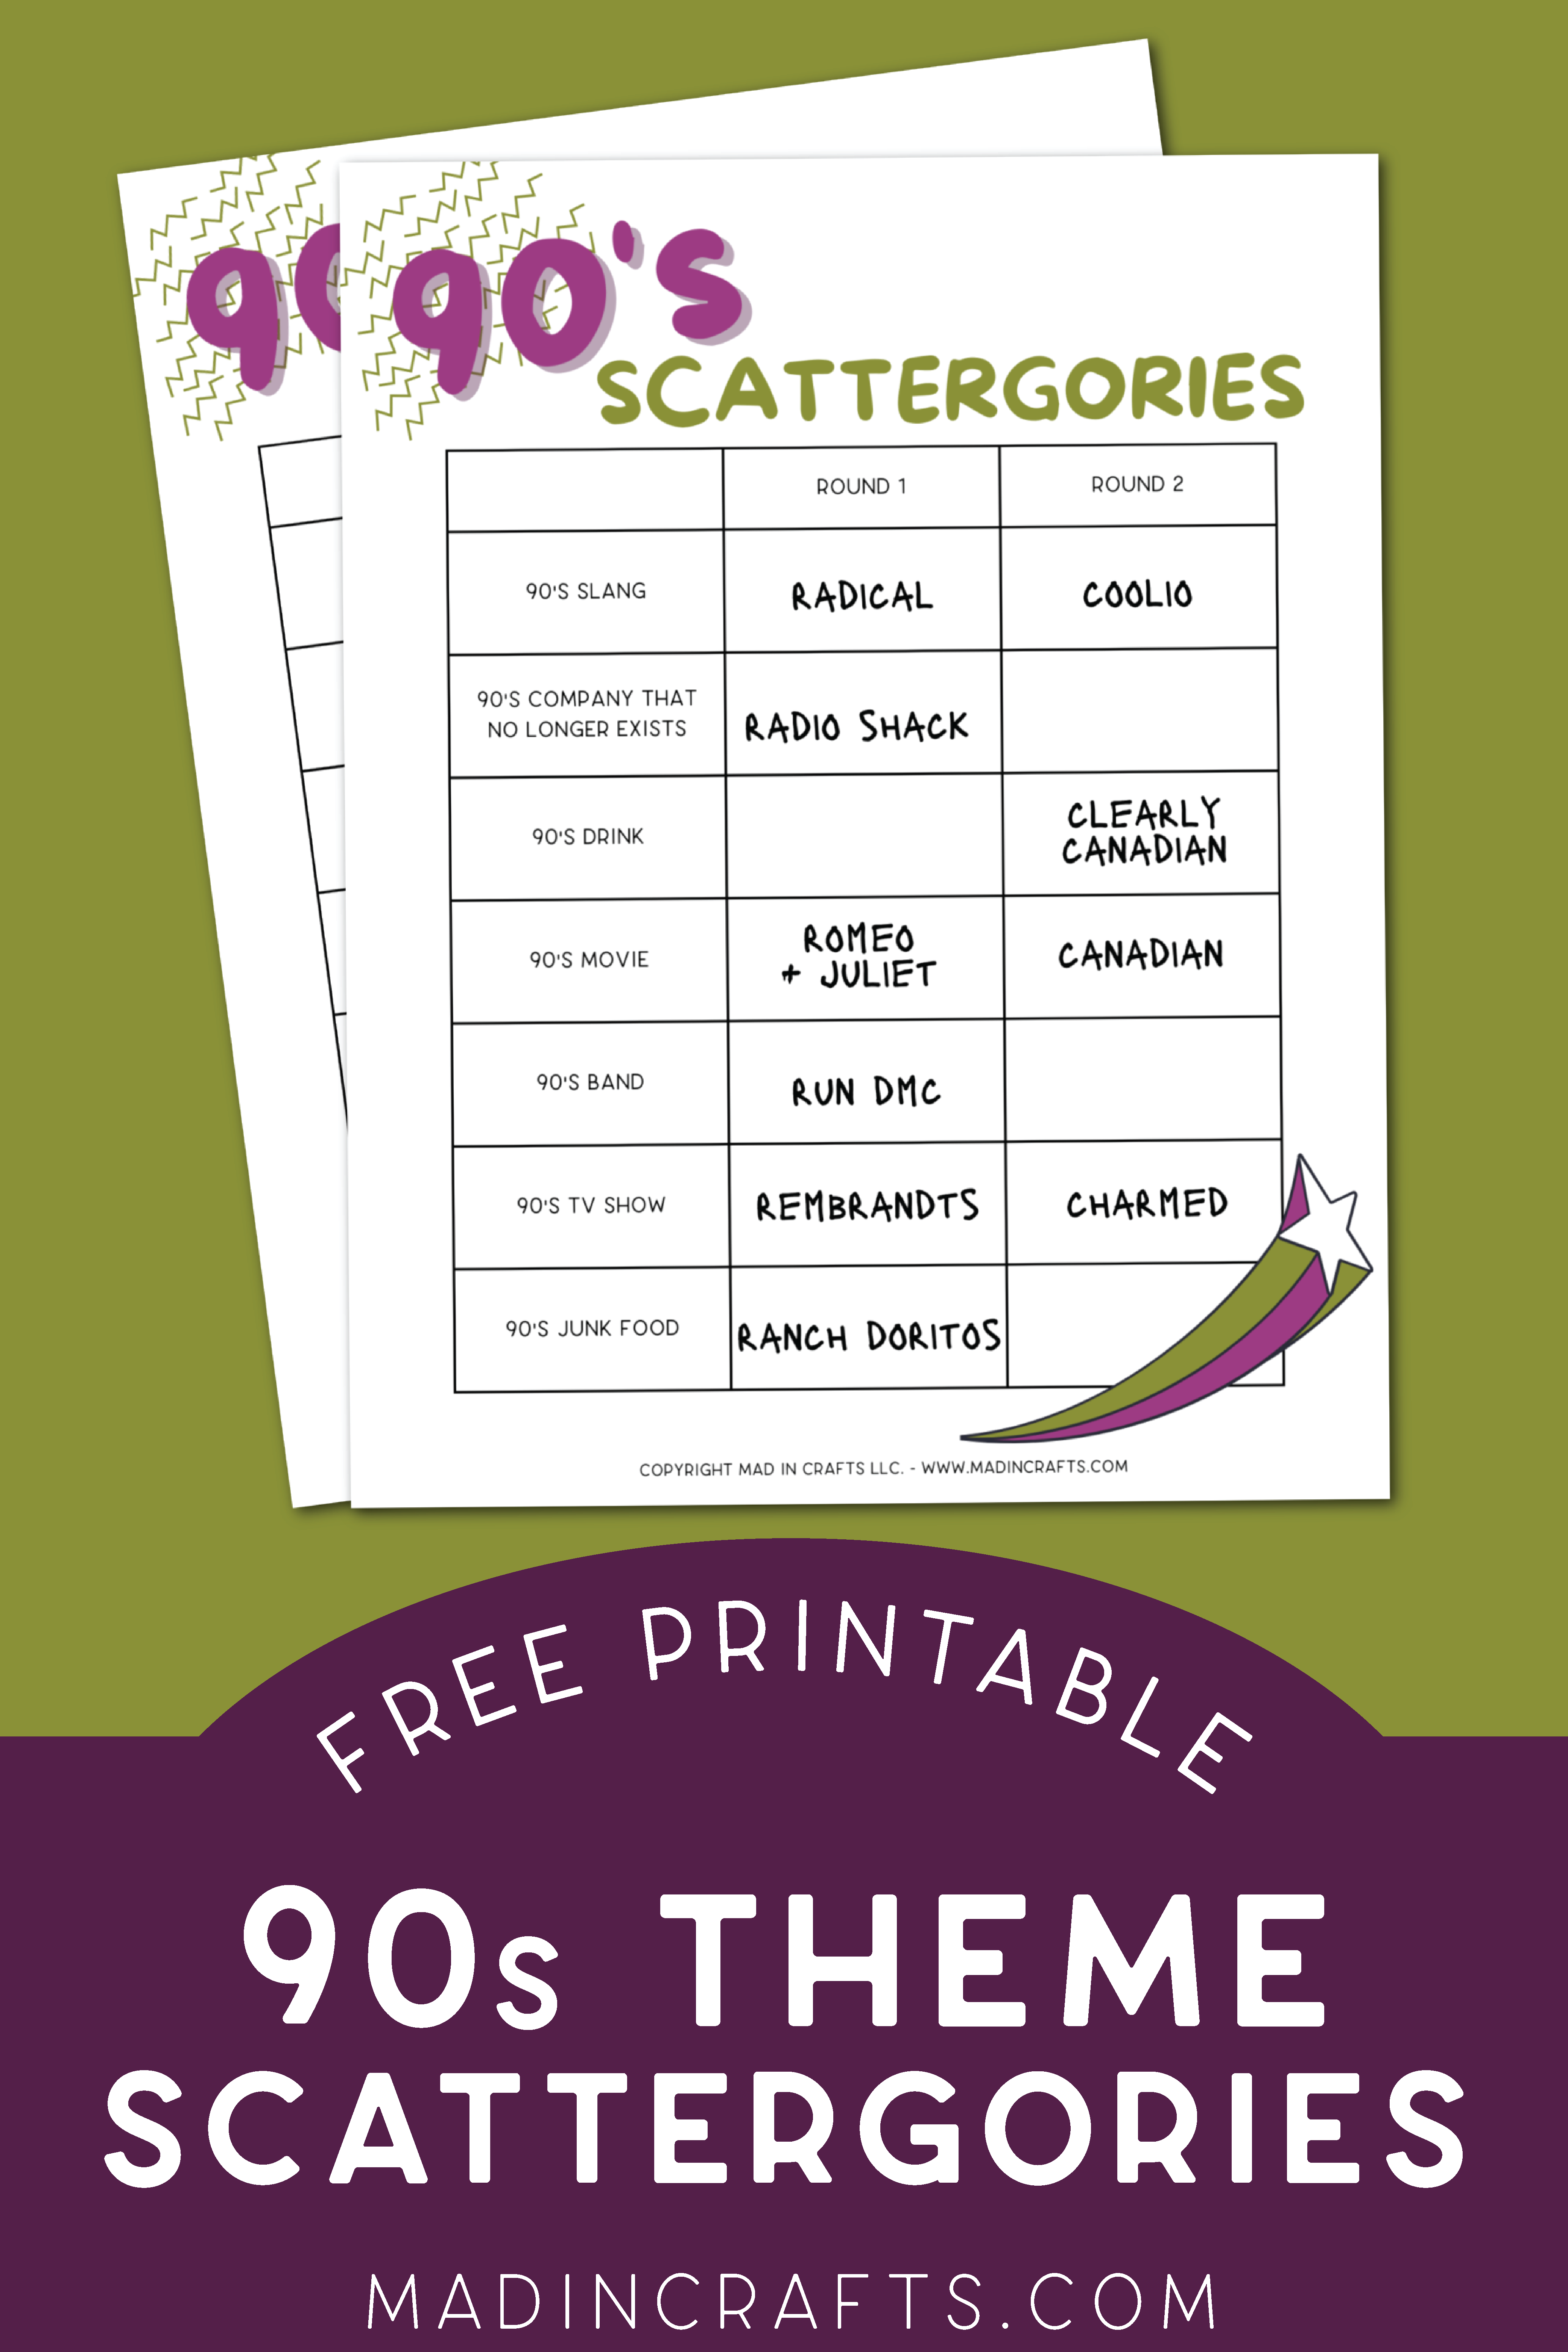 Two printable scattergory game sheets on a green background